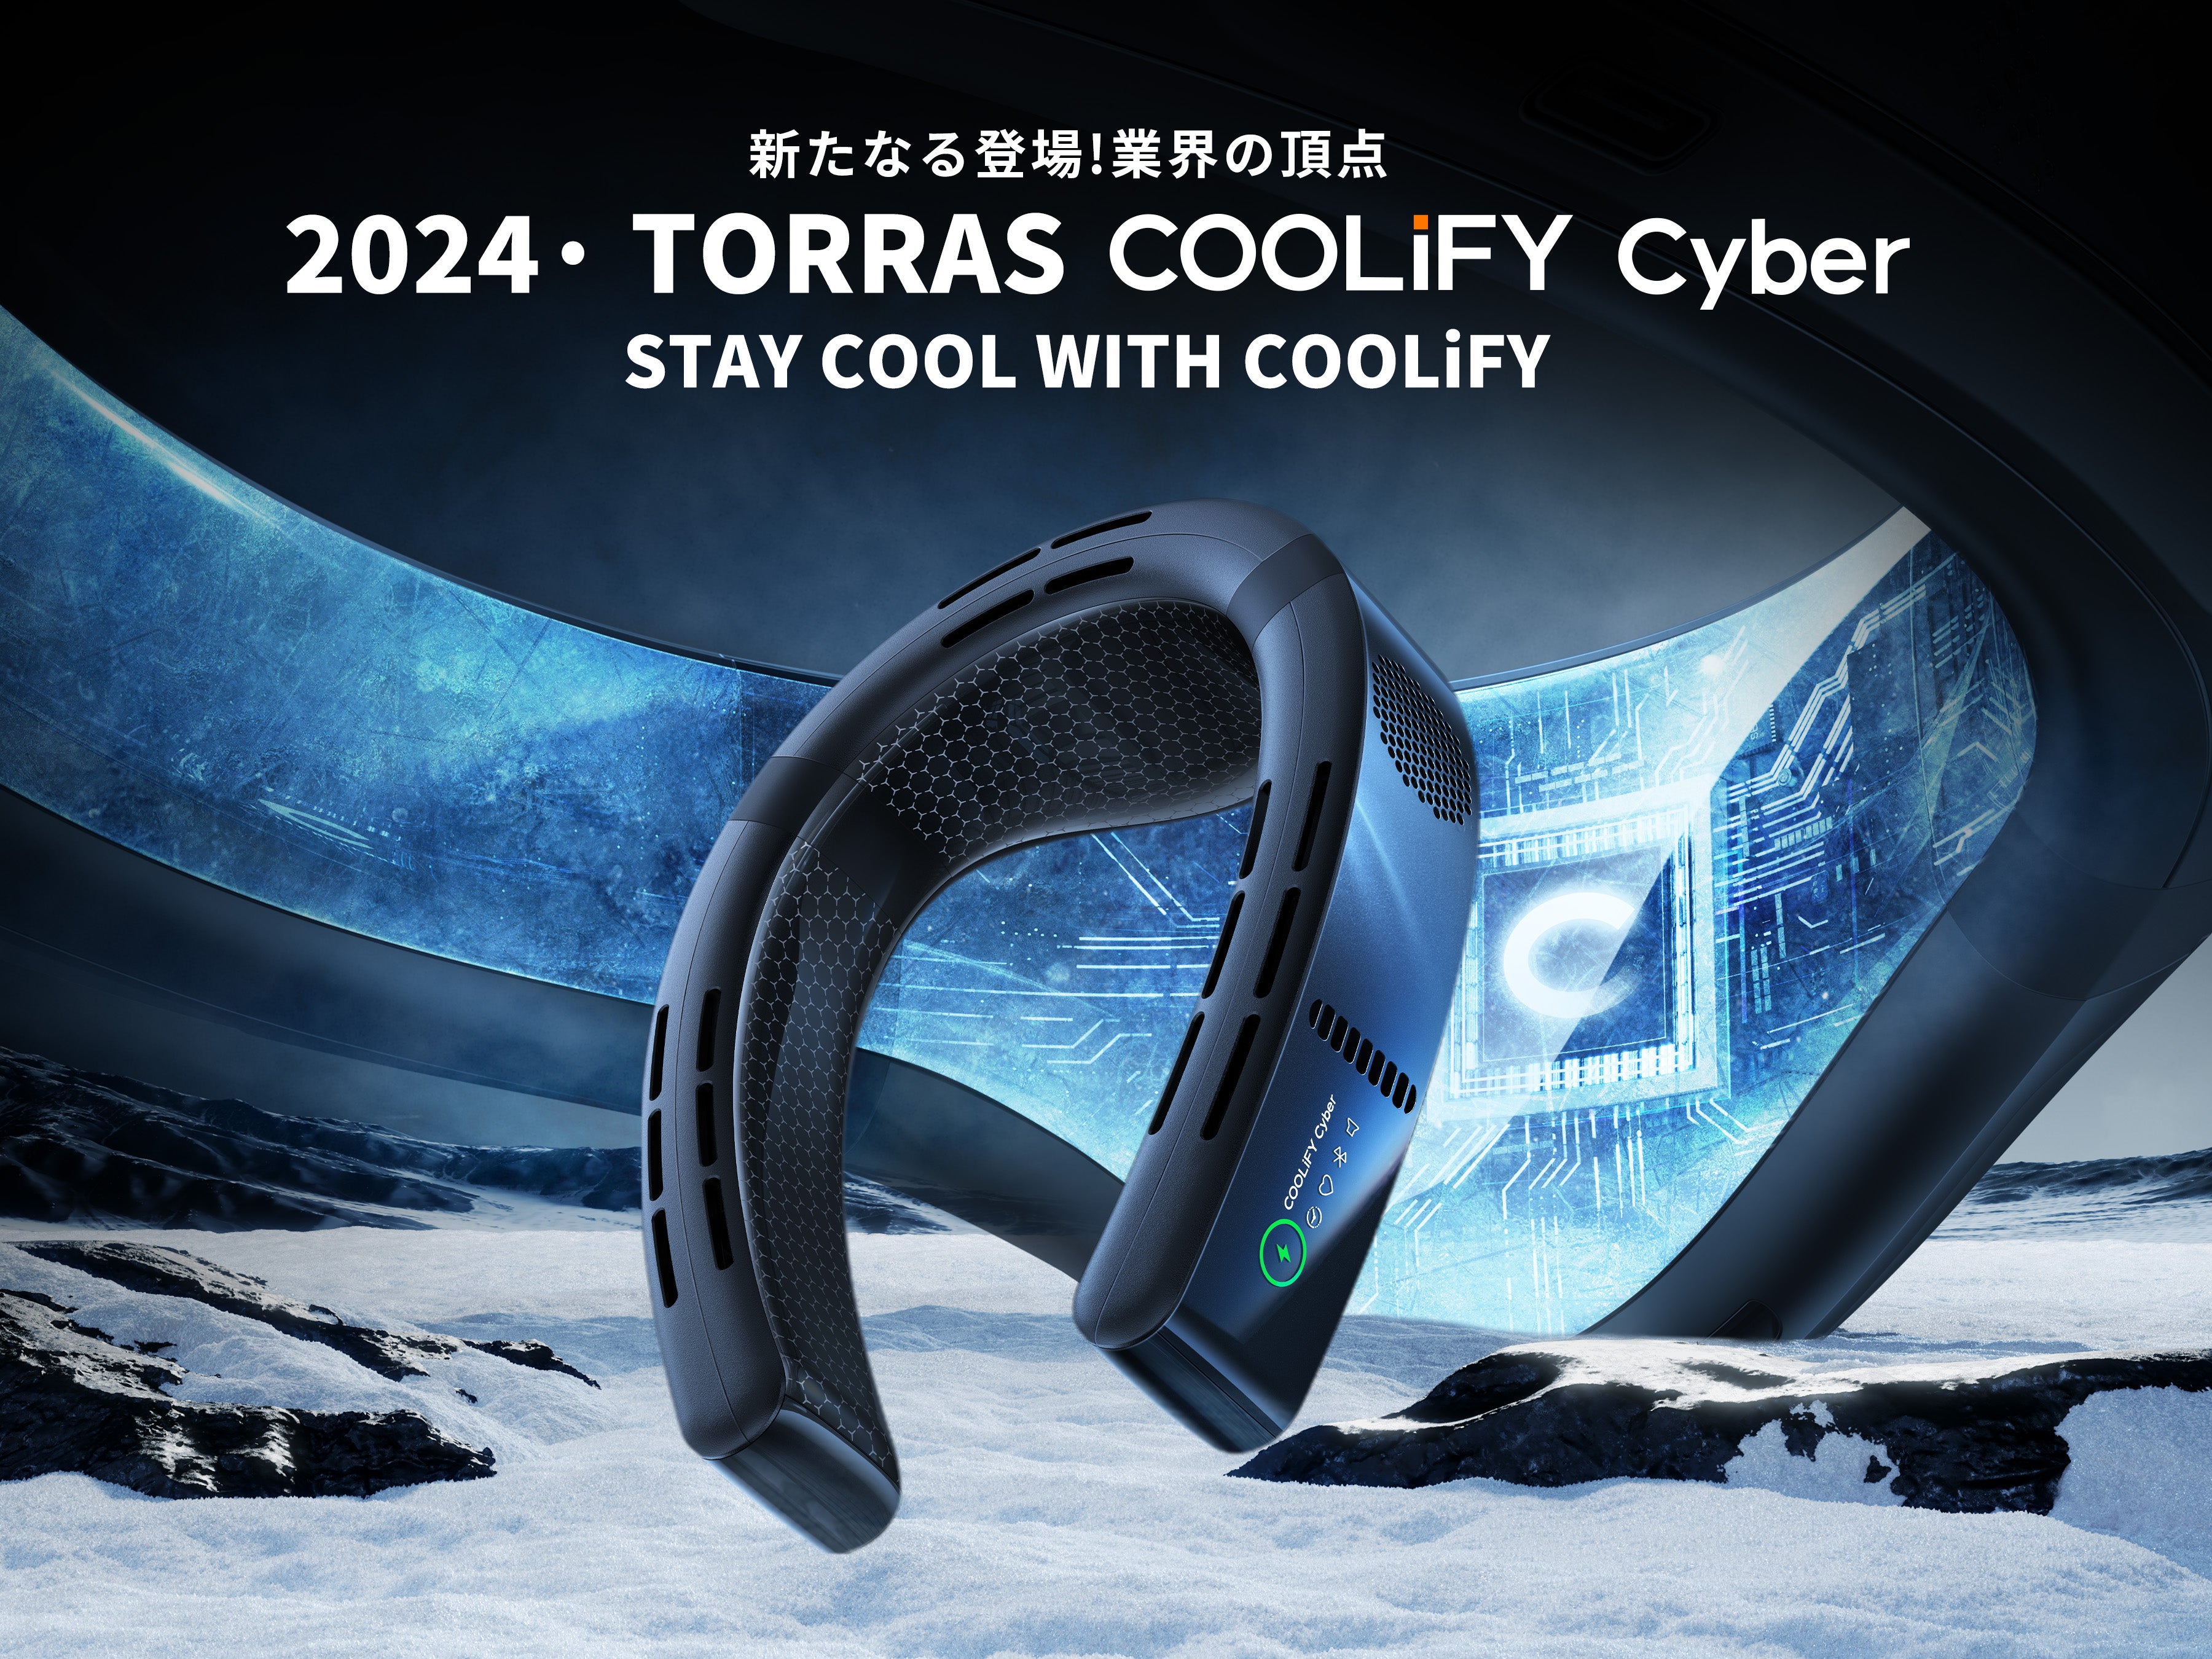 TORRAS COOLiFY Cyber 最強冷却ウェアラブルエアコン - 新世代ネック ...